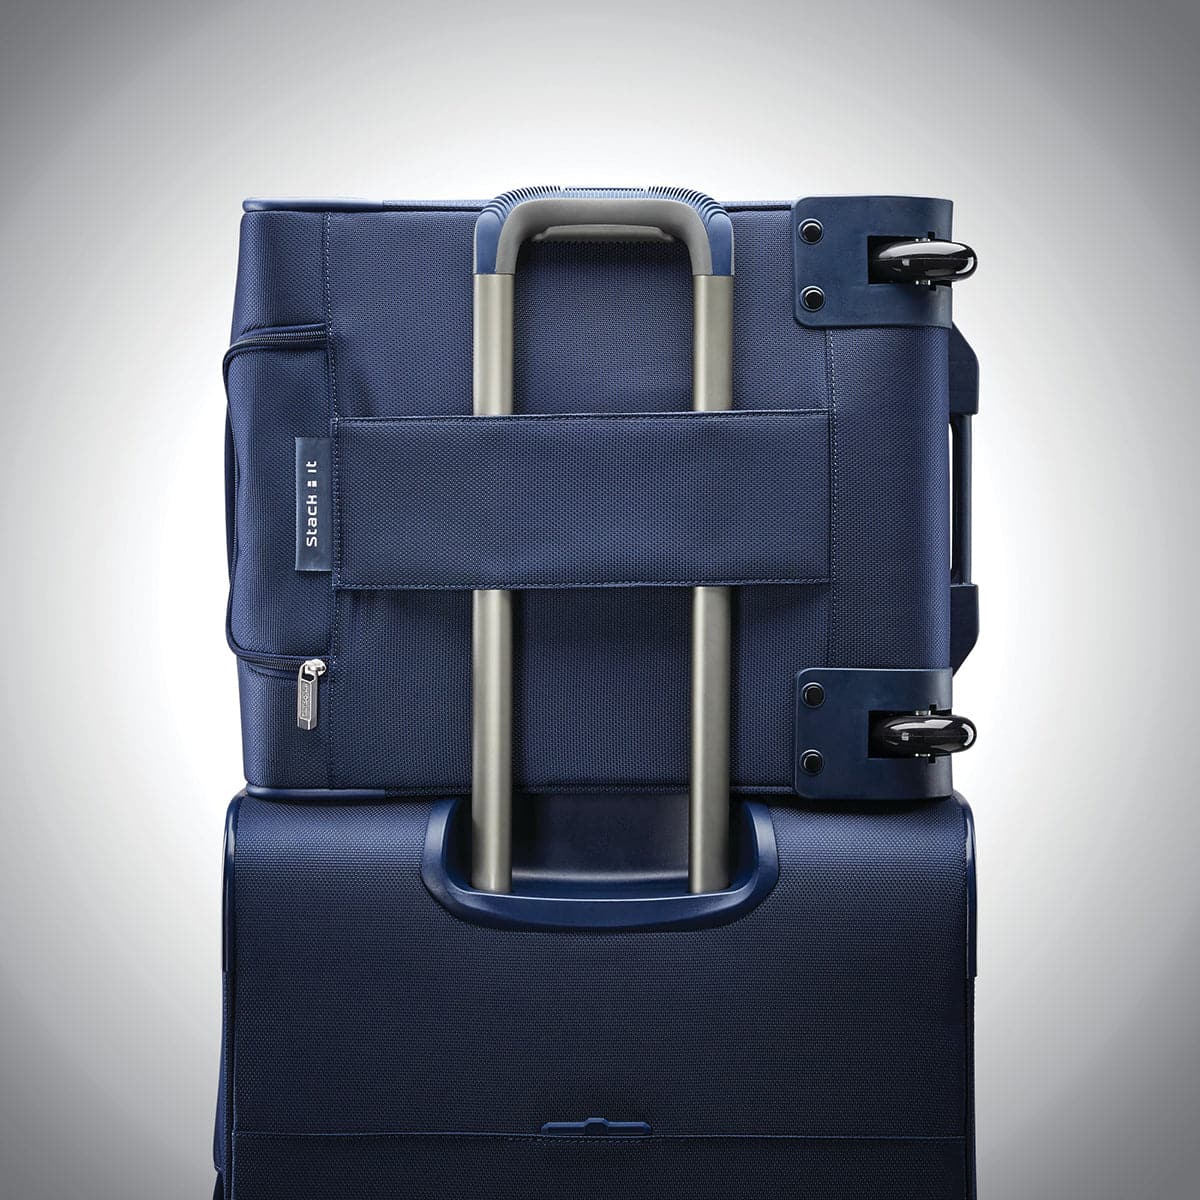 Samsonite Insignis Underseater Wheeled Carry On Luggage